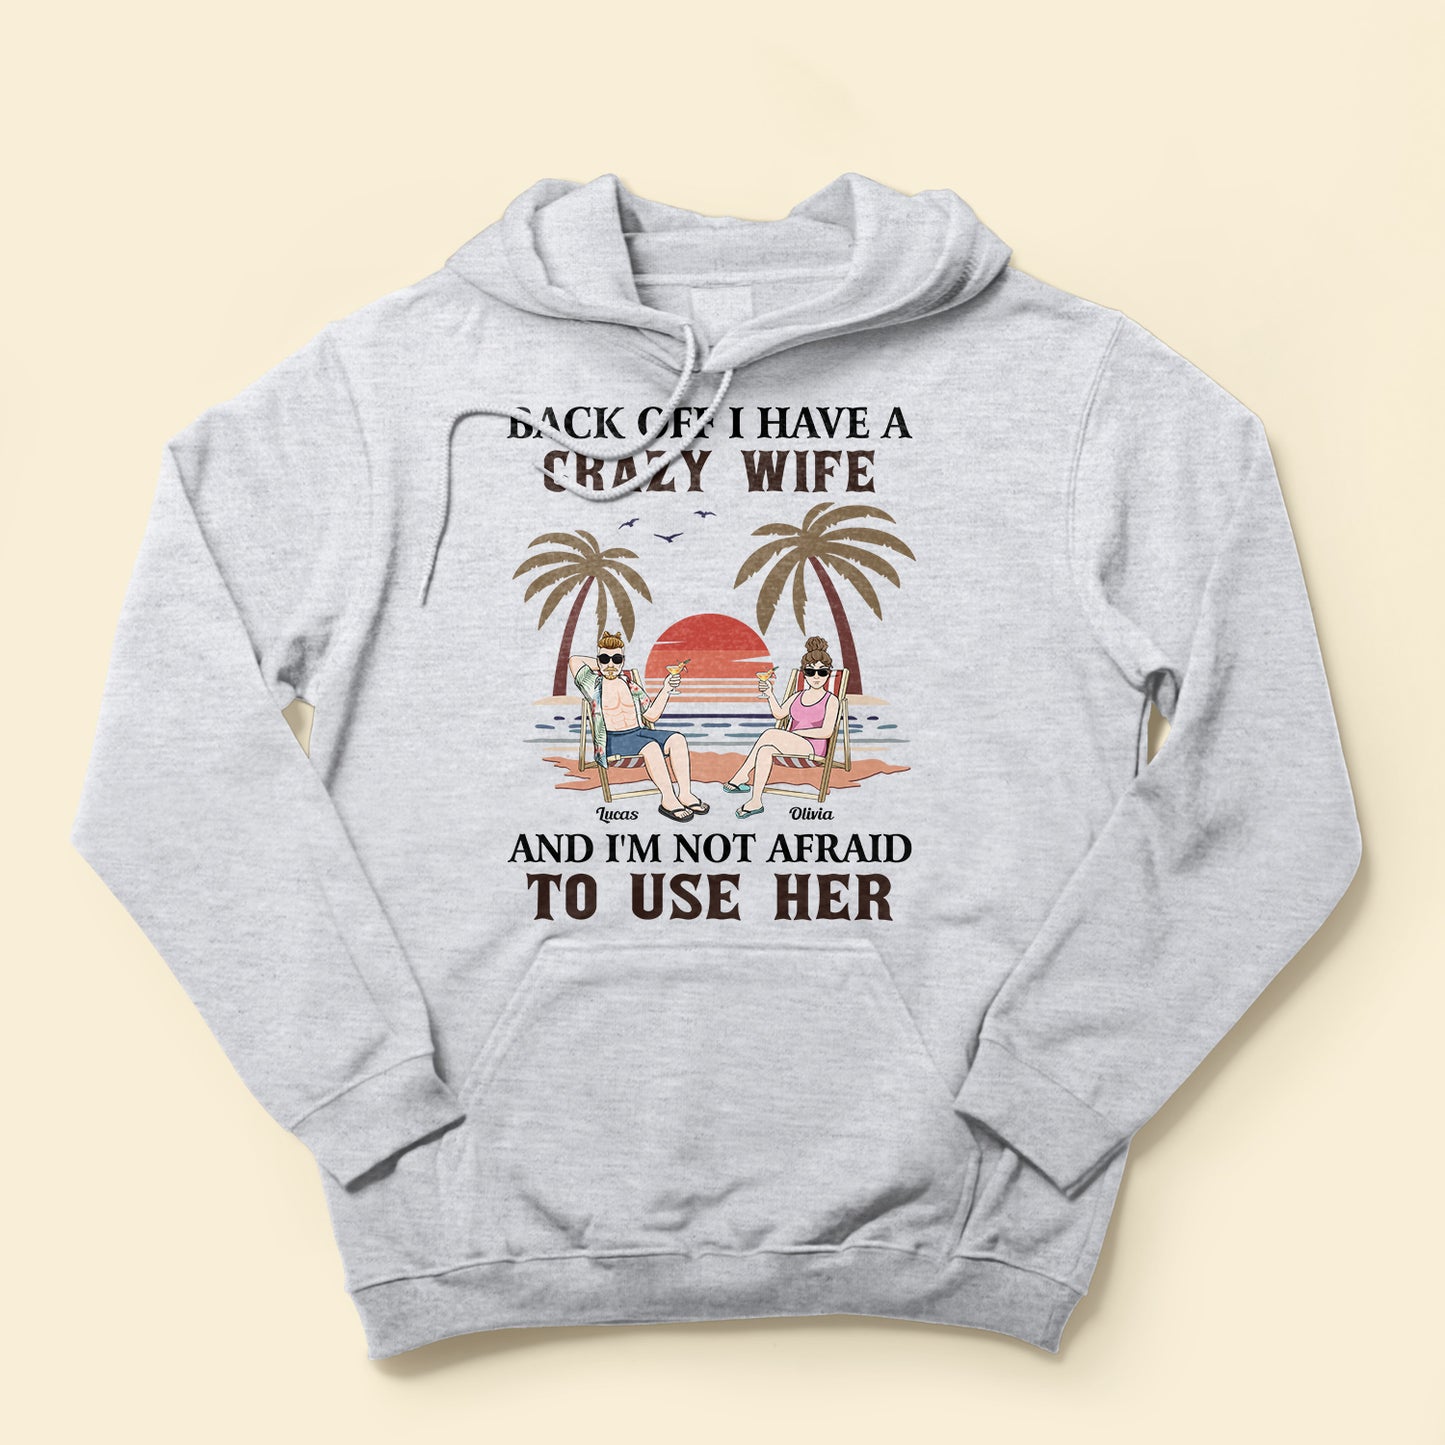 Back Off I Have A Crazy Wife - Personalized Shirt - Funny Birthday Gift For Husband, Dad - Gift From Daughters, Sons, Wife